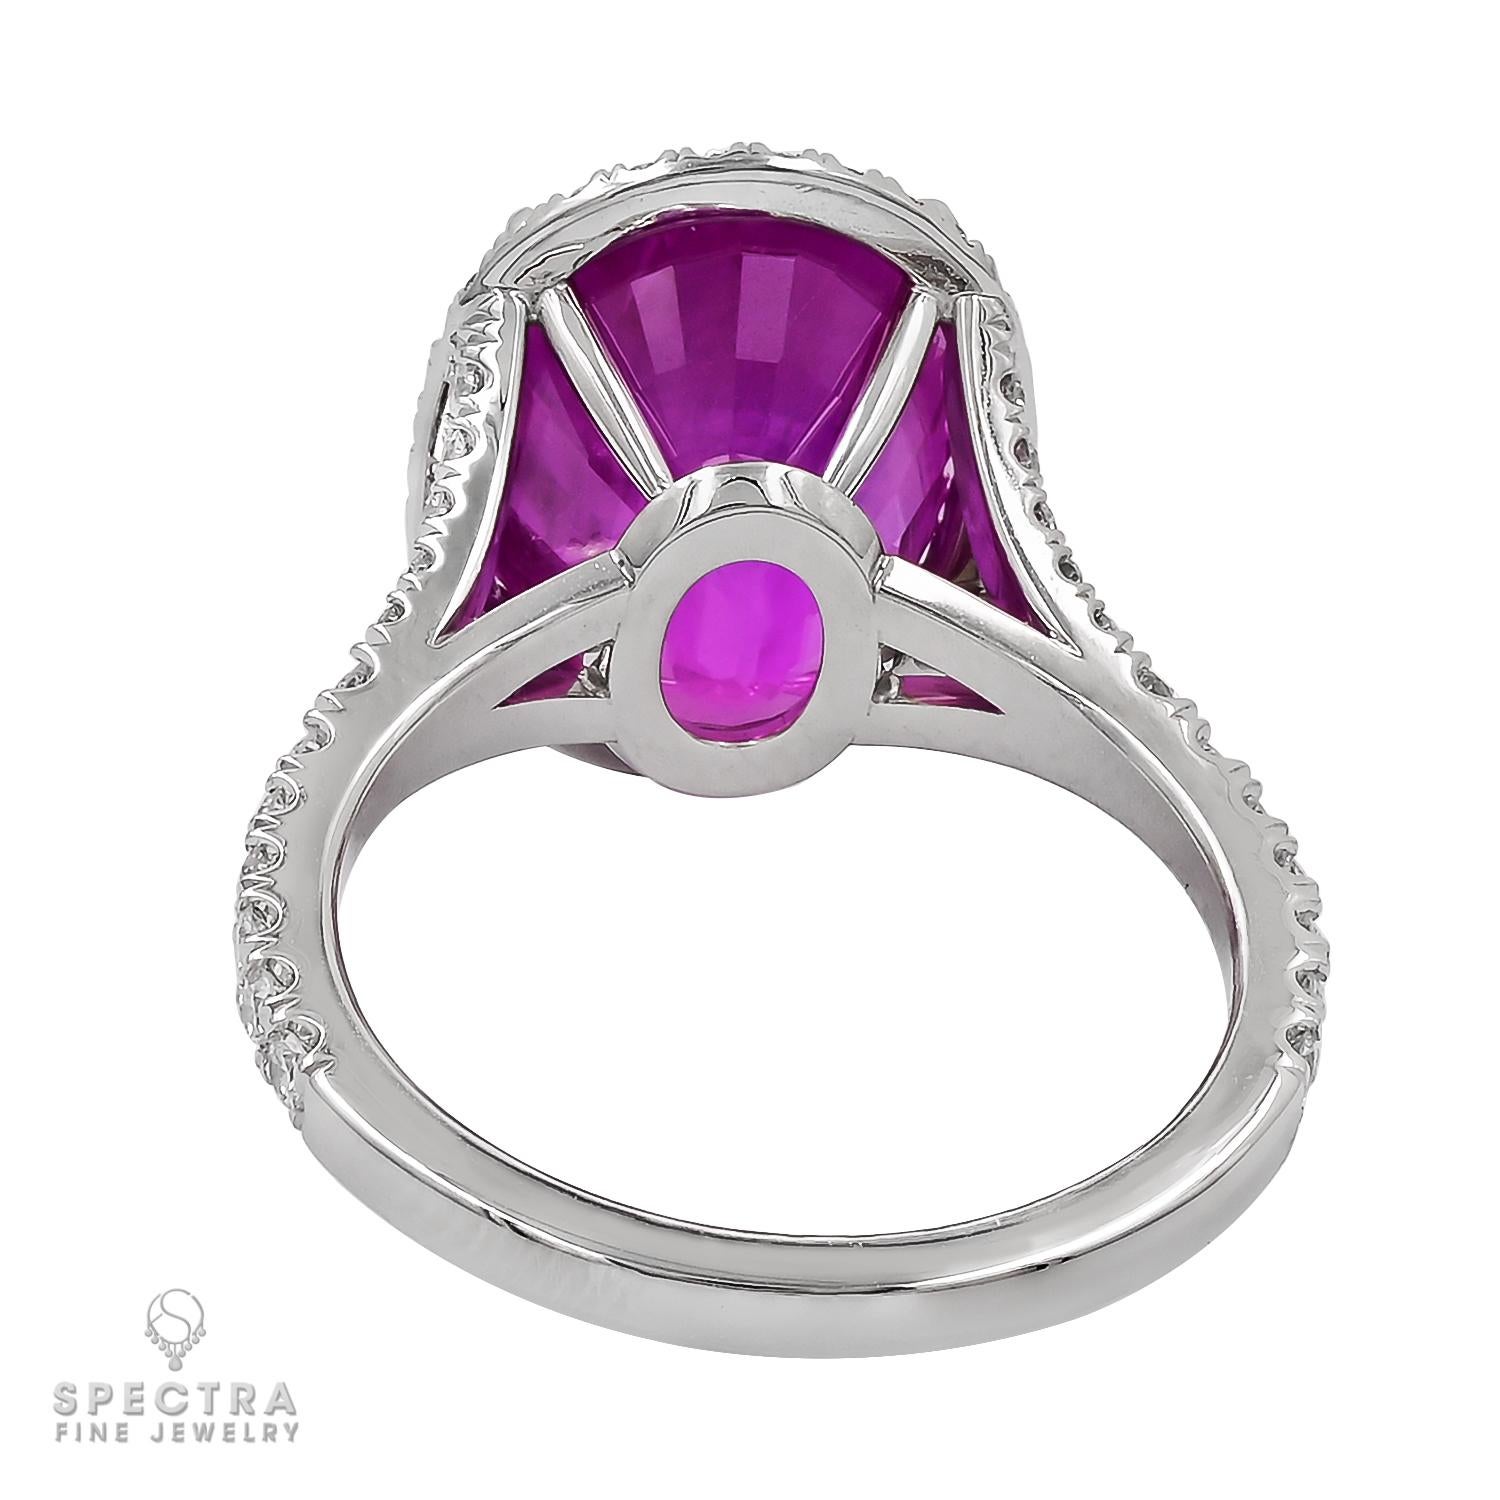 Contemporary Spectra Fine Jewelry GRS Certified 10.06 Carat Burma Pink Sapphire Diamond Ring For Sale